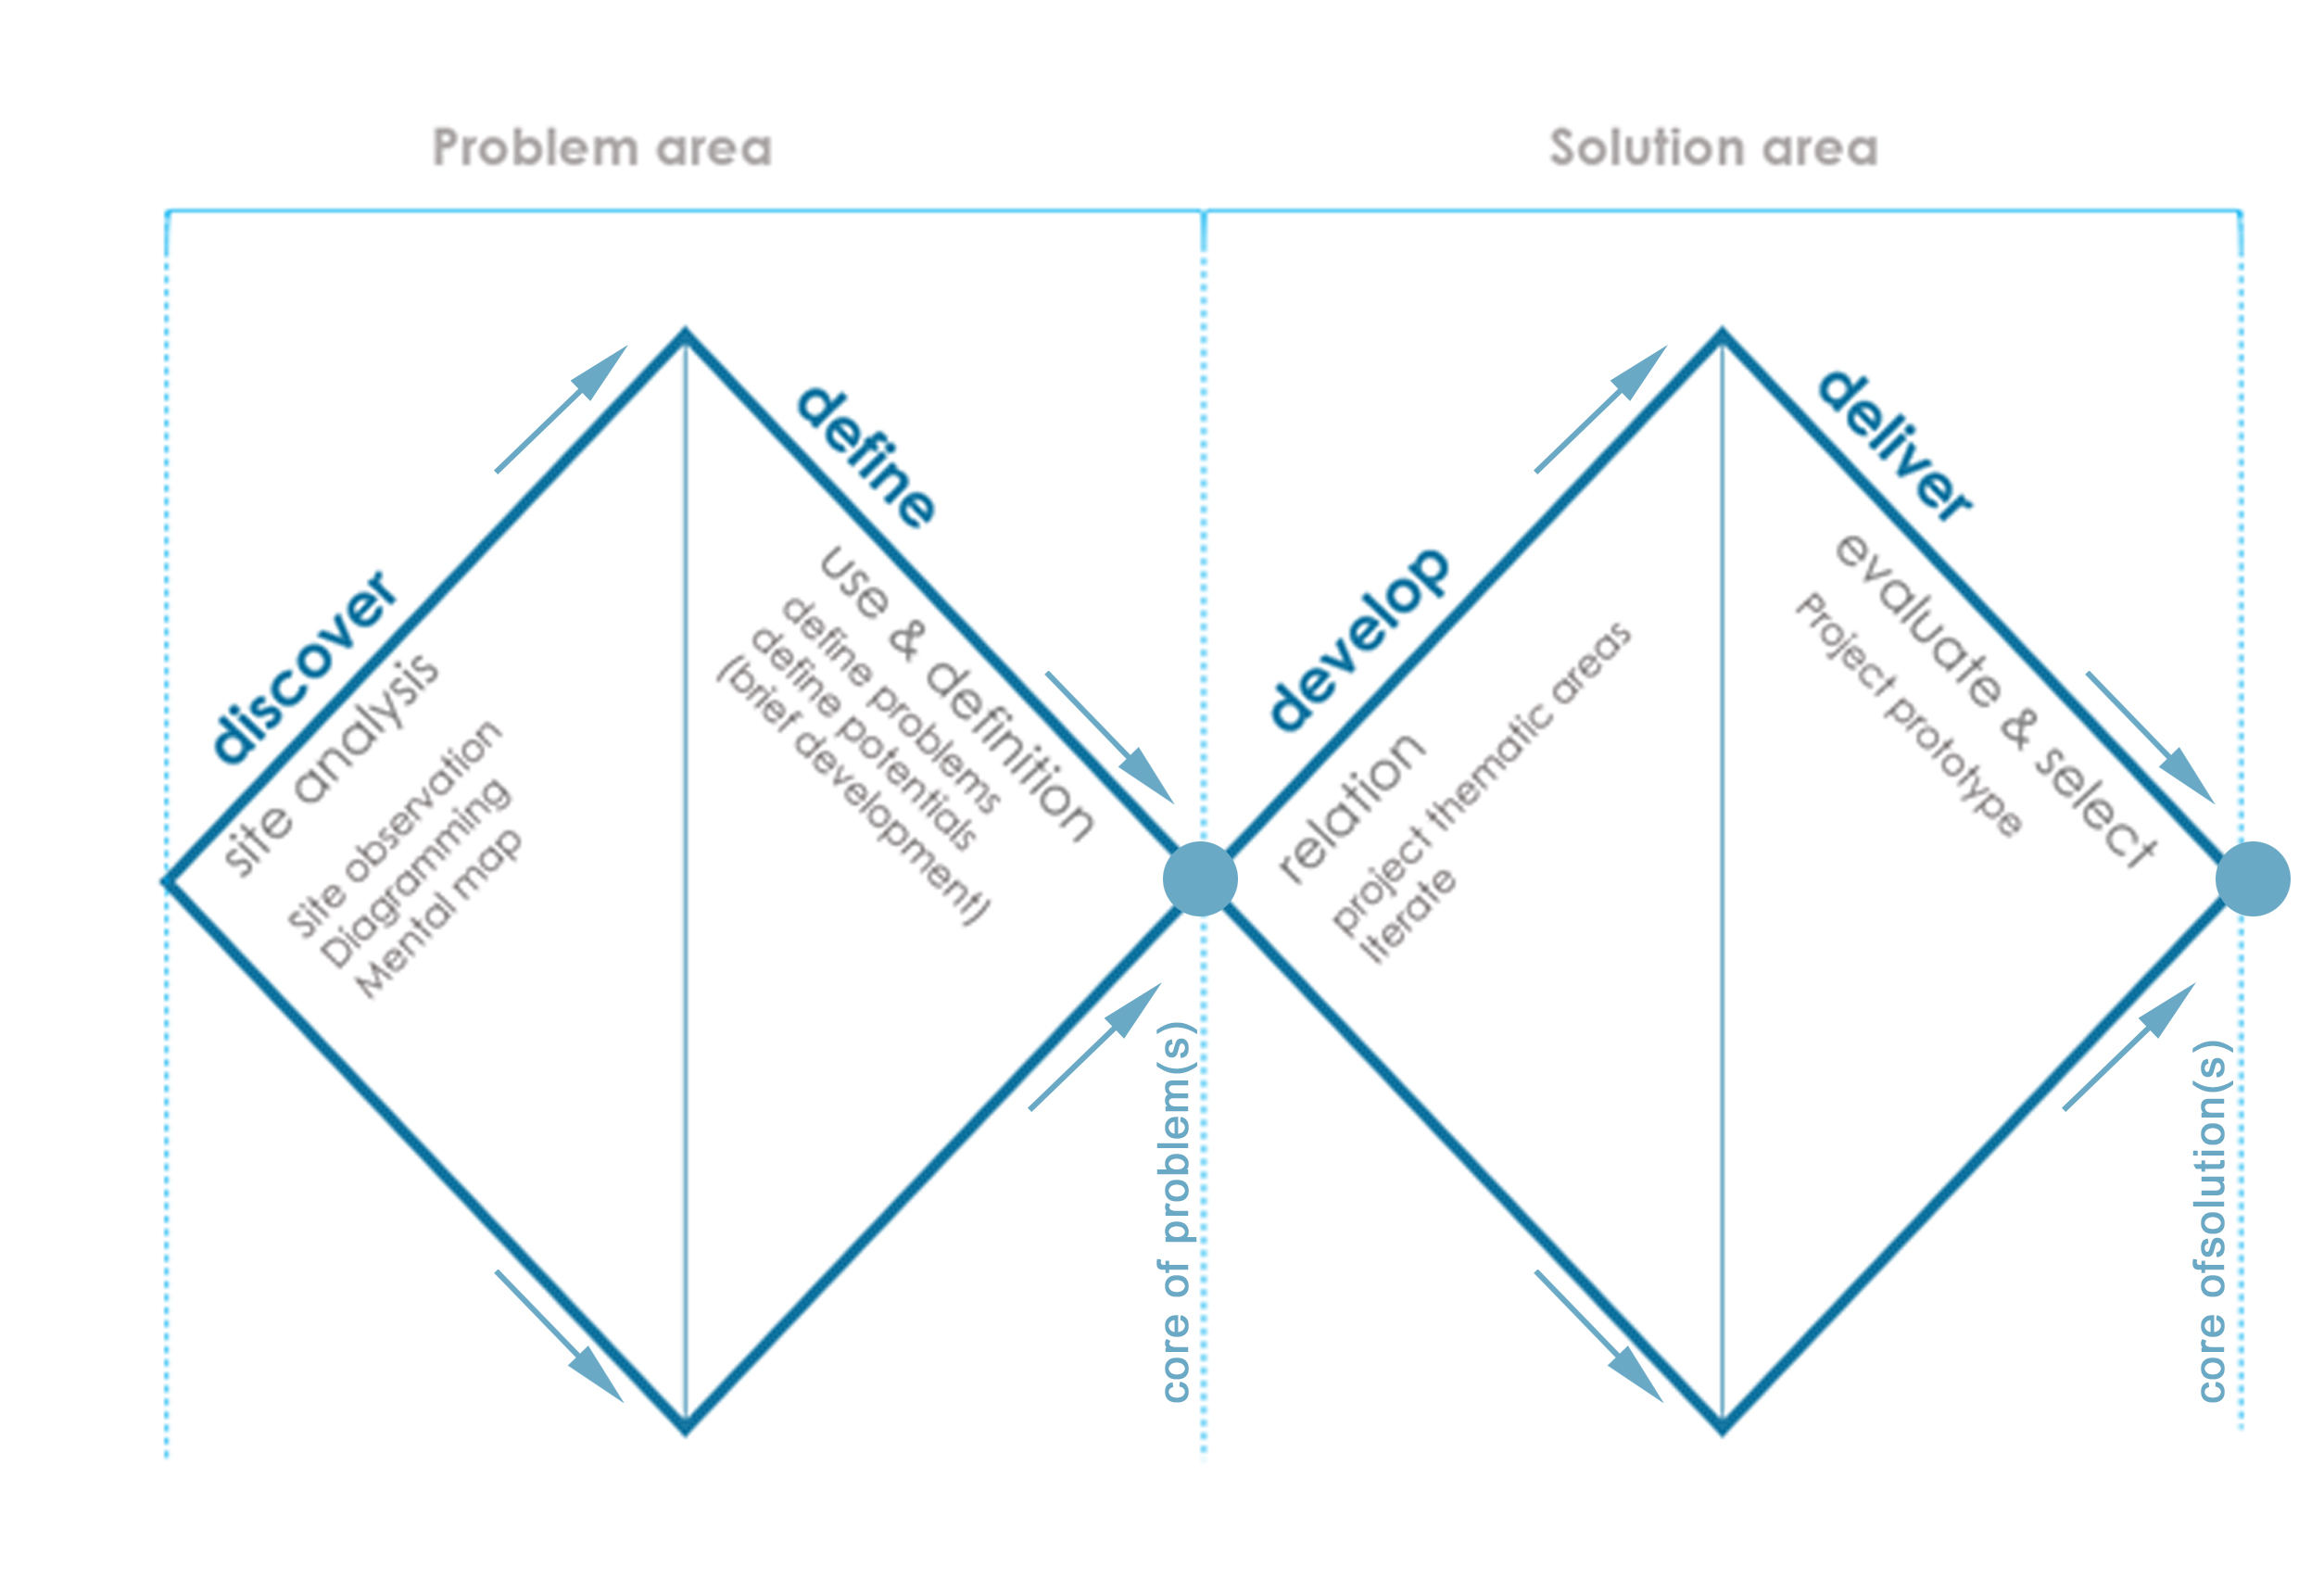 Figure 2: Double diamond process model diagram, adapted for urban and architectural design fields - 